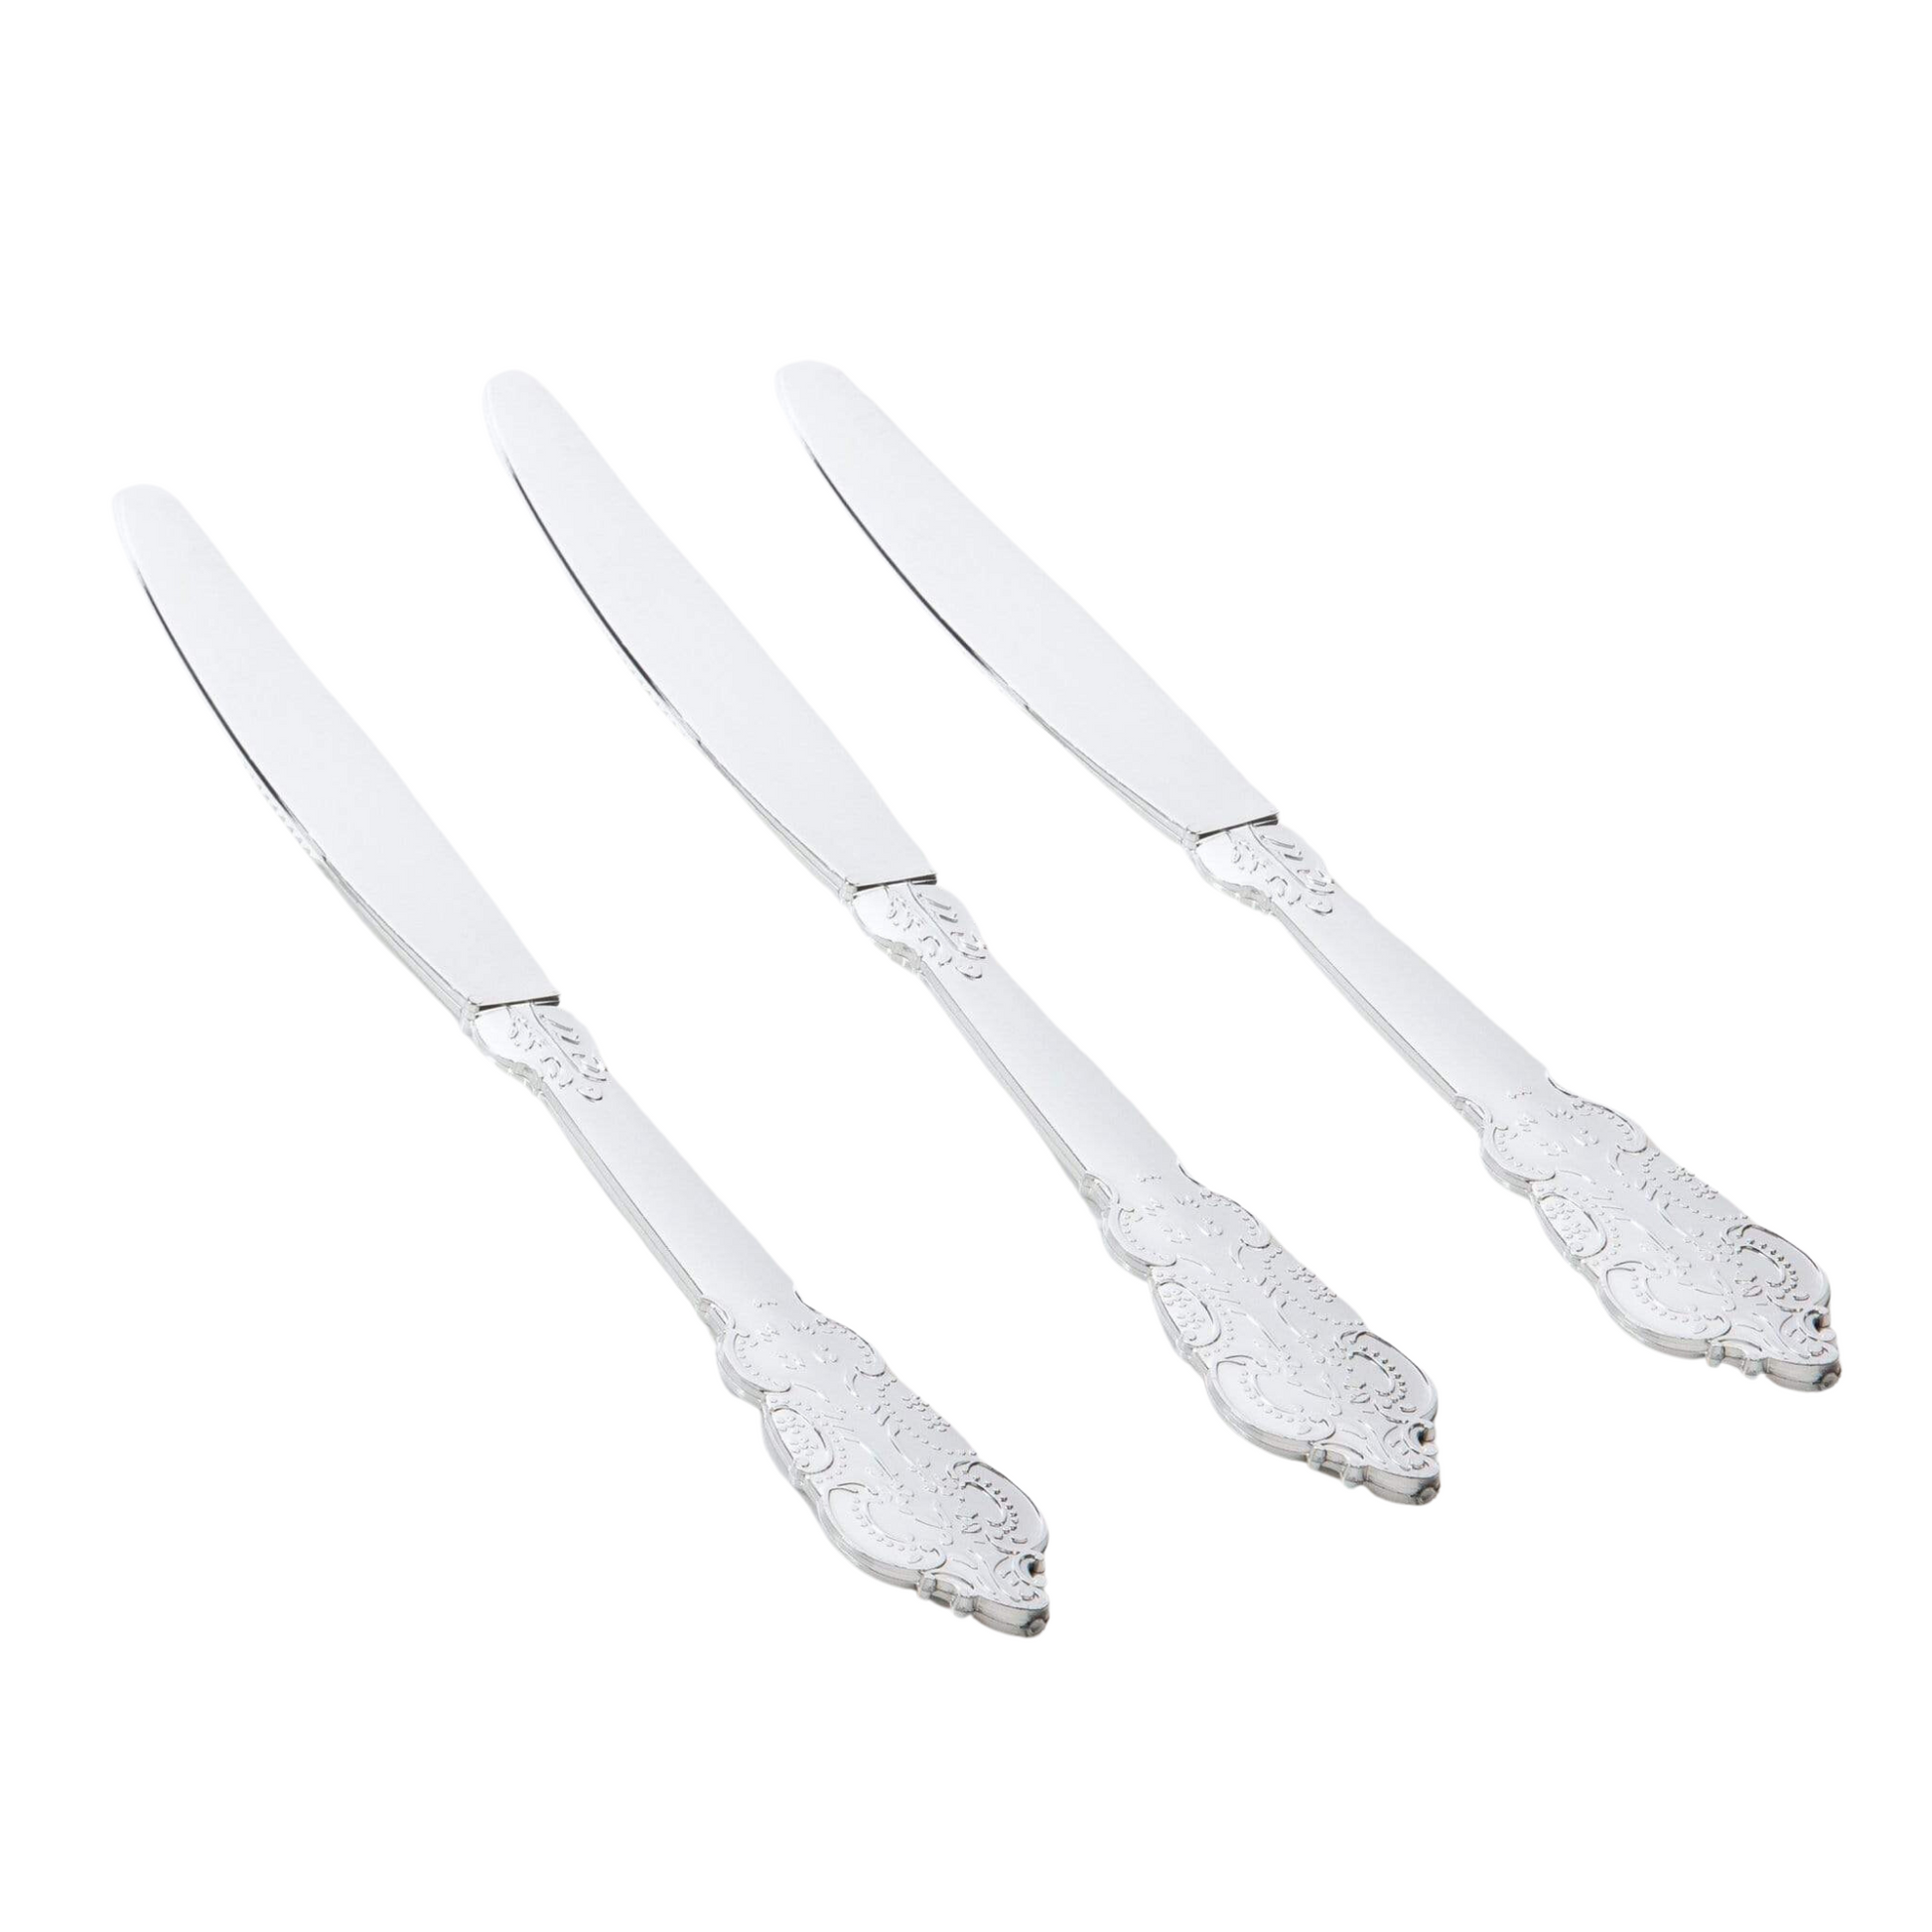 venetian style reusable silver knives - luxe party pack of 20 pieces 